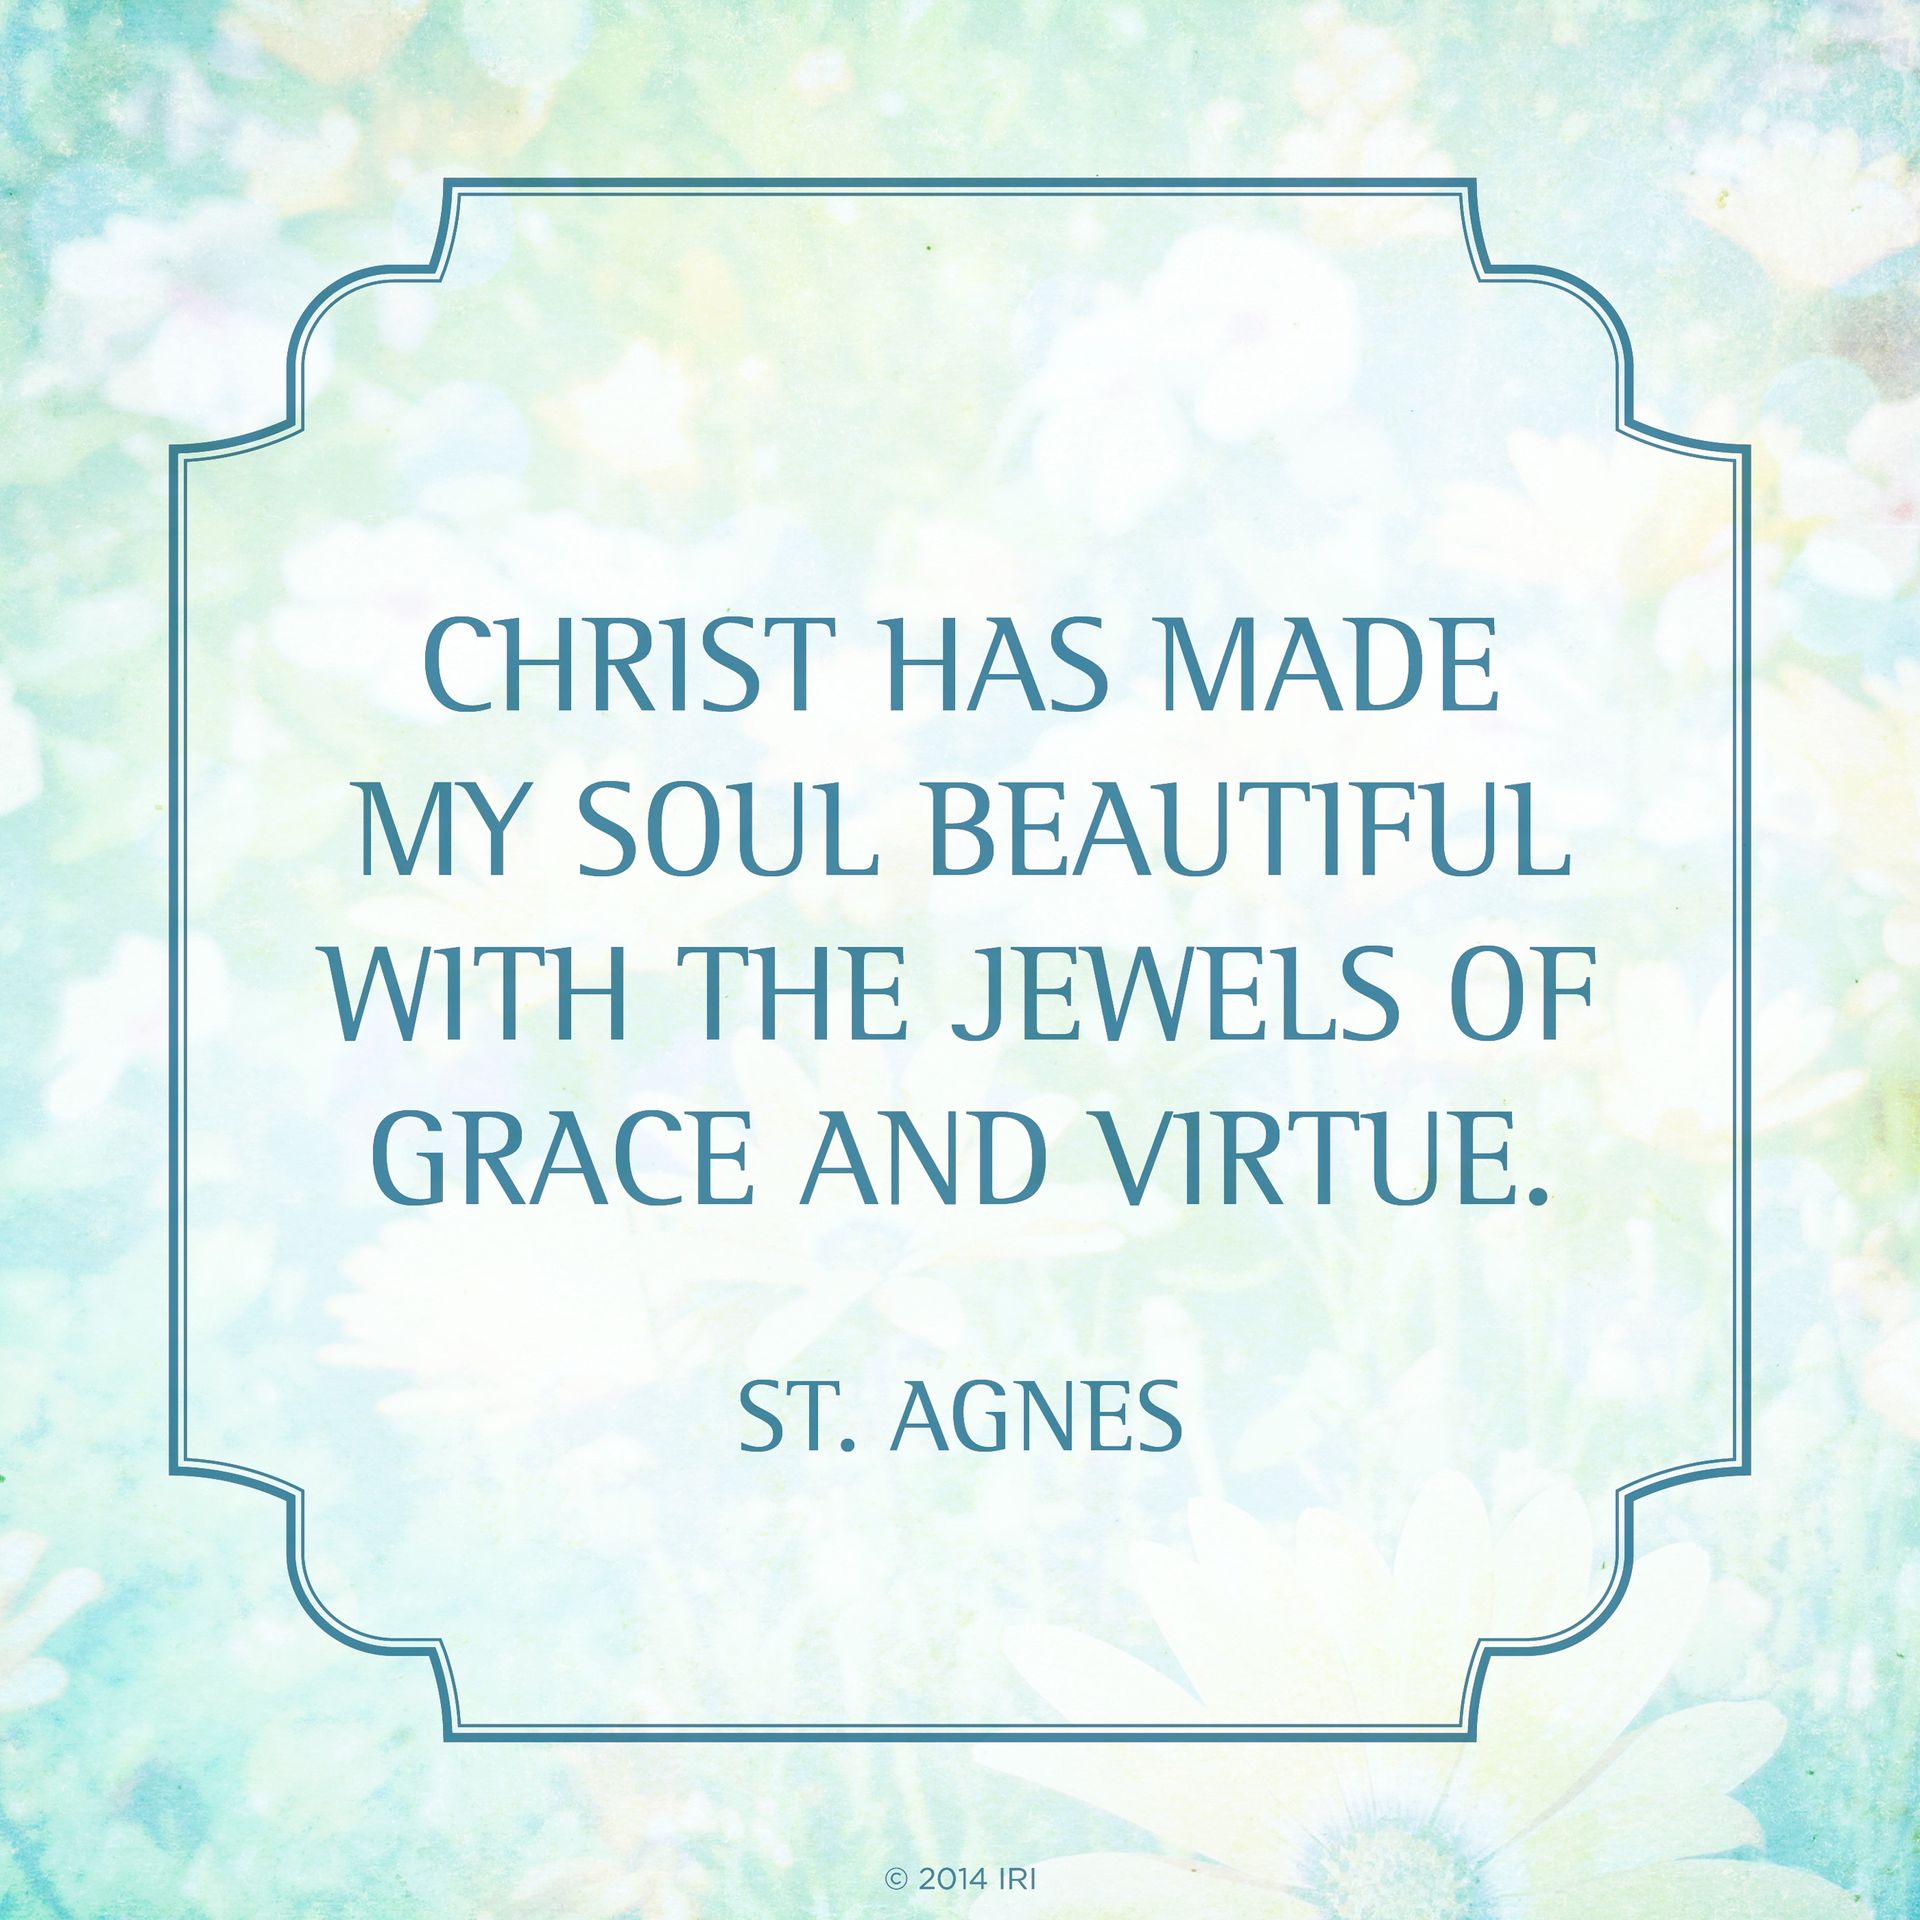 “Christ has made my soul beautiful with the jewels of grace and virtue.”—St. Agnes